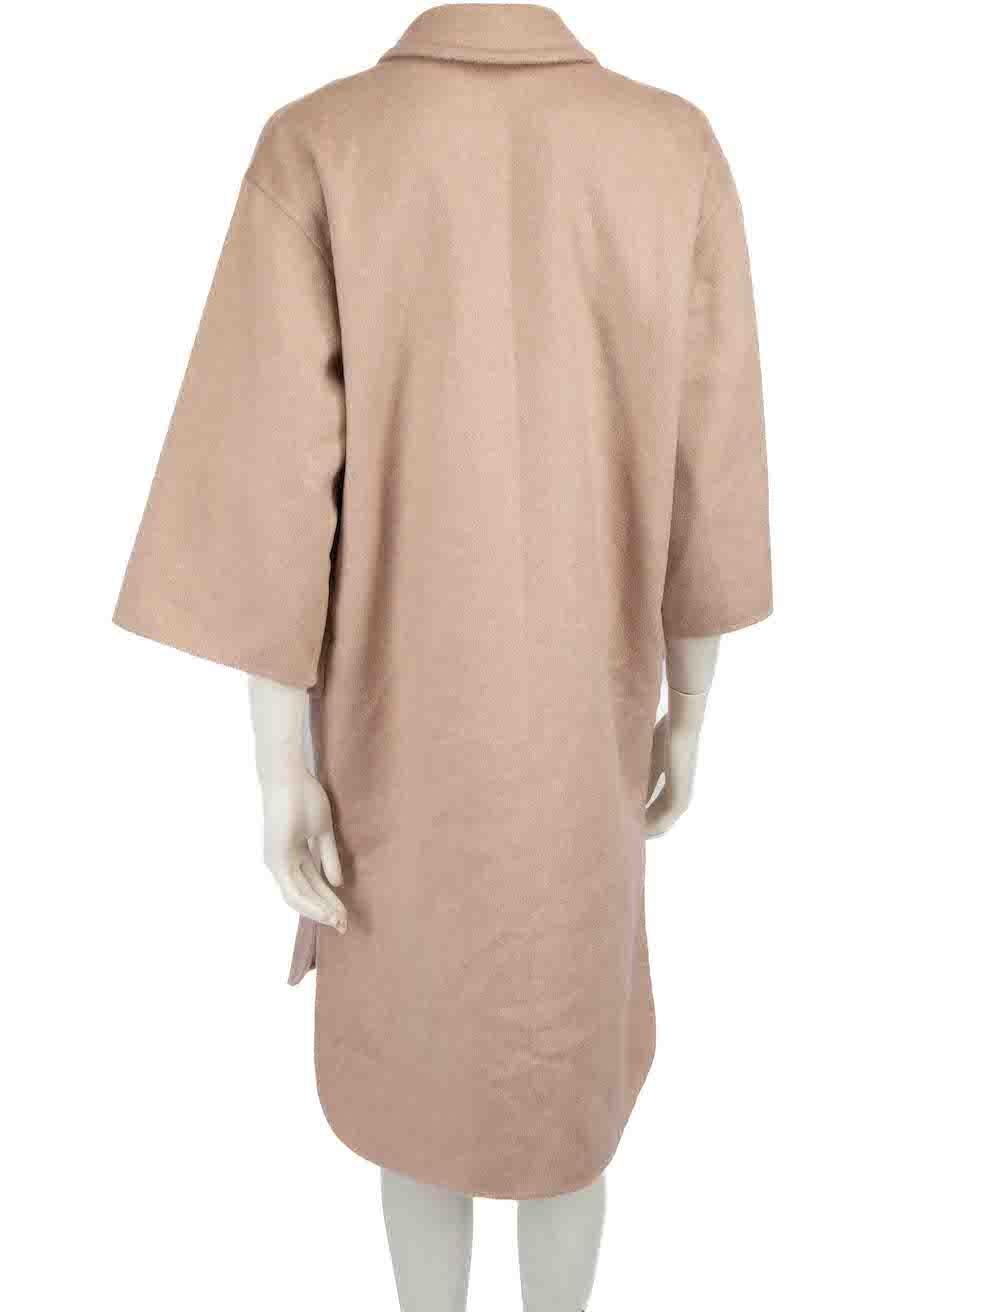 Max Mara Pink Cashmere Mid-Length Coat Size XXS In Excellent Condition For Sale In London, GB